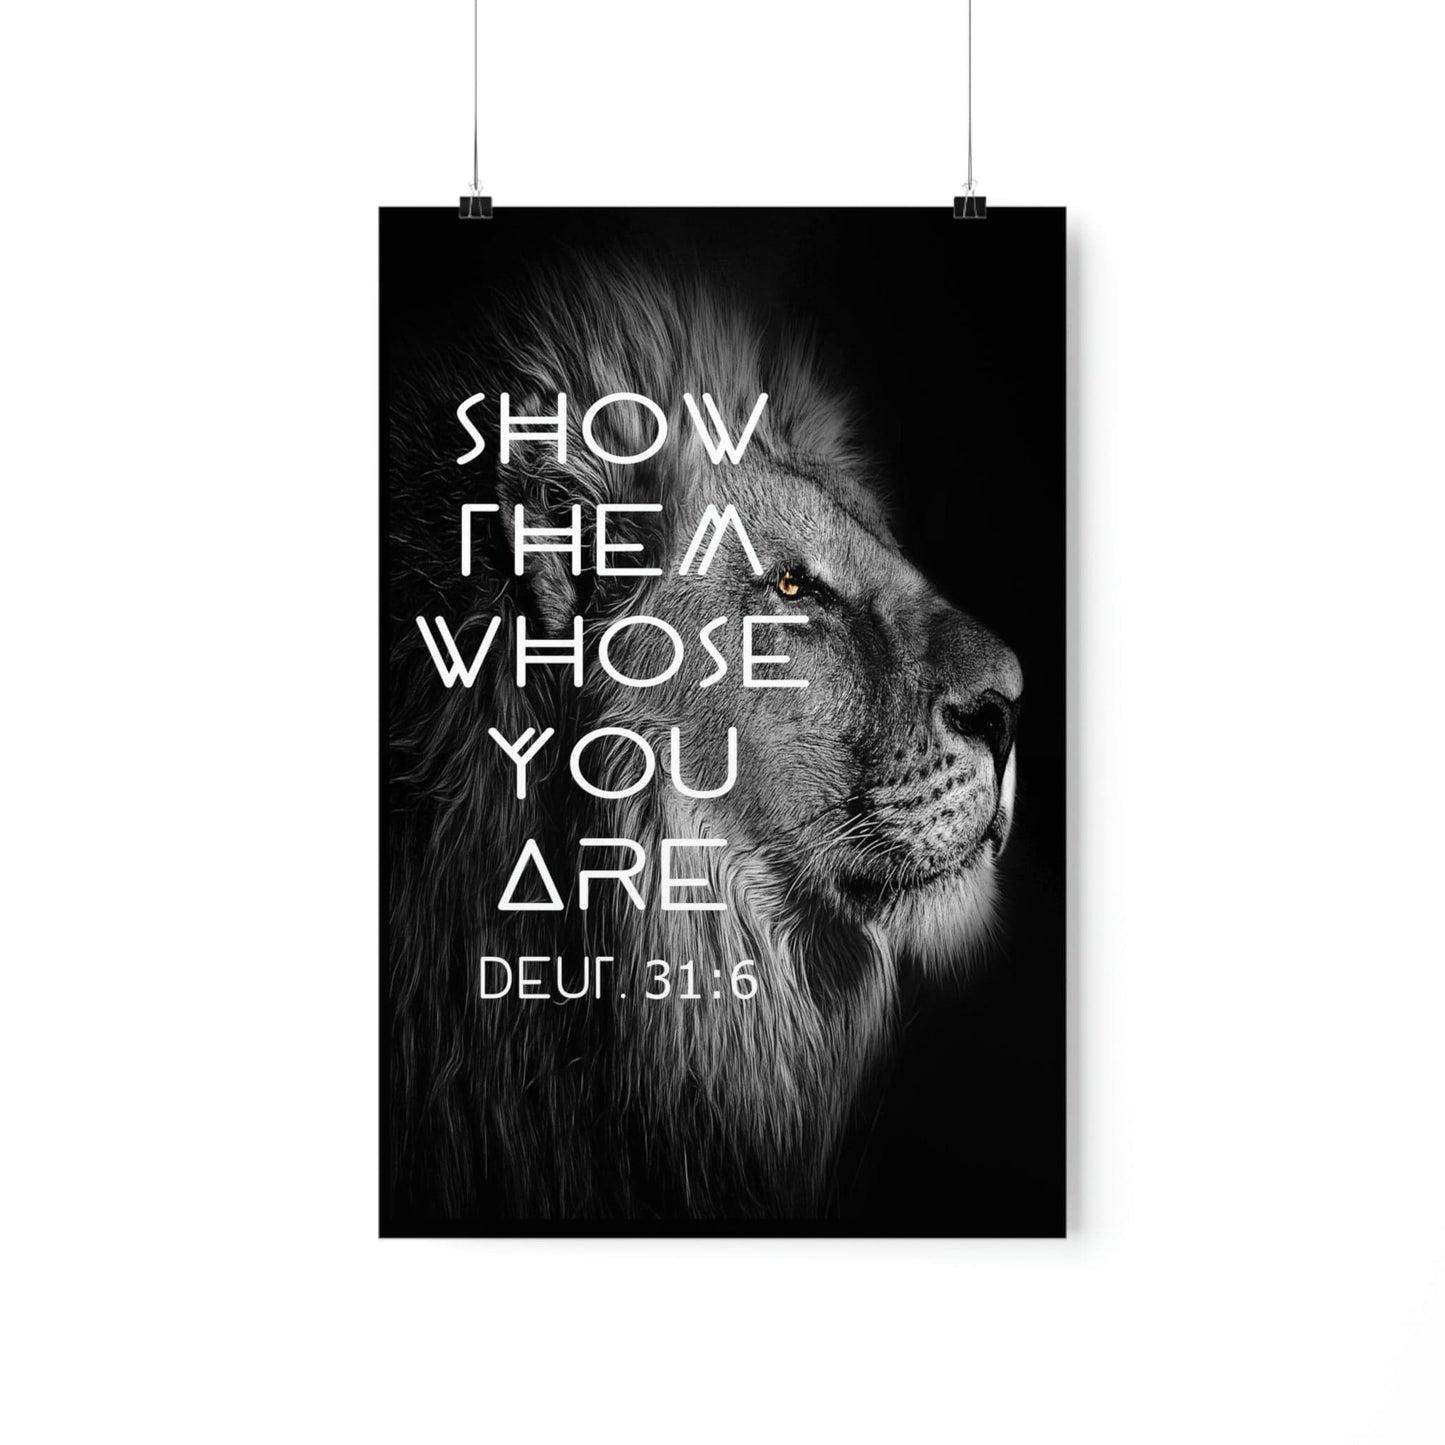 Printify Poster 12″ x 18″ / Matte Show Them Whose You Are - Deut. 31:6 Christian Poster